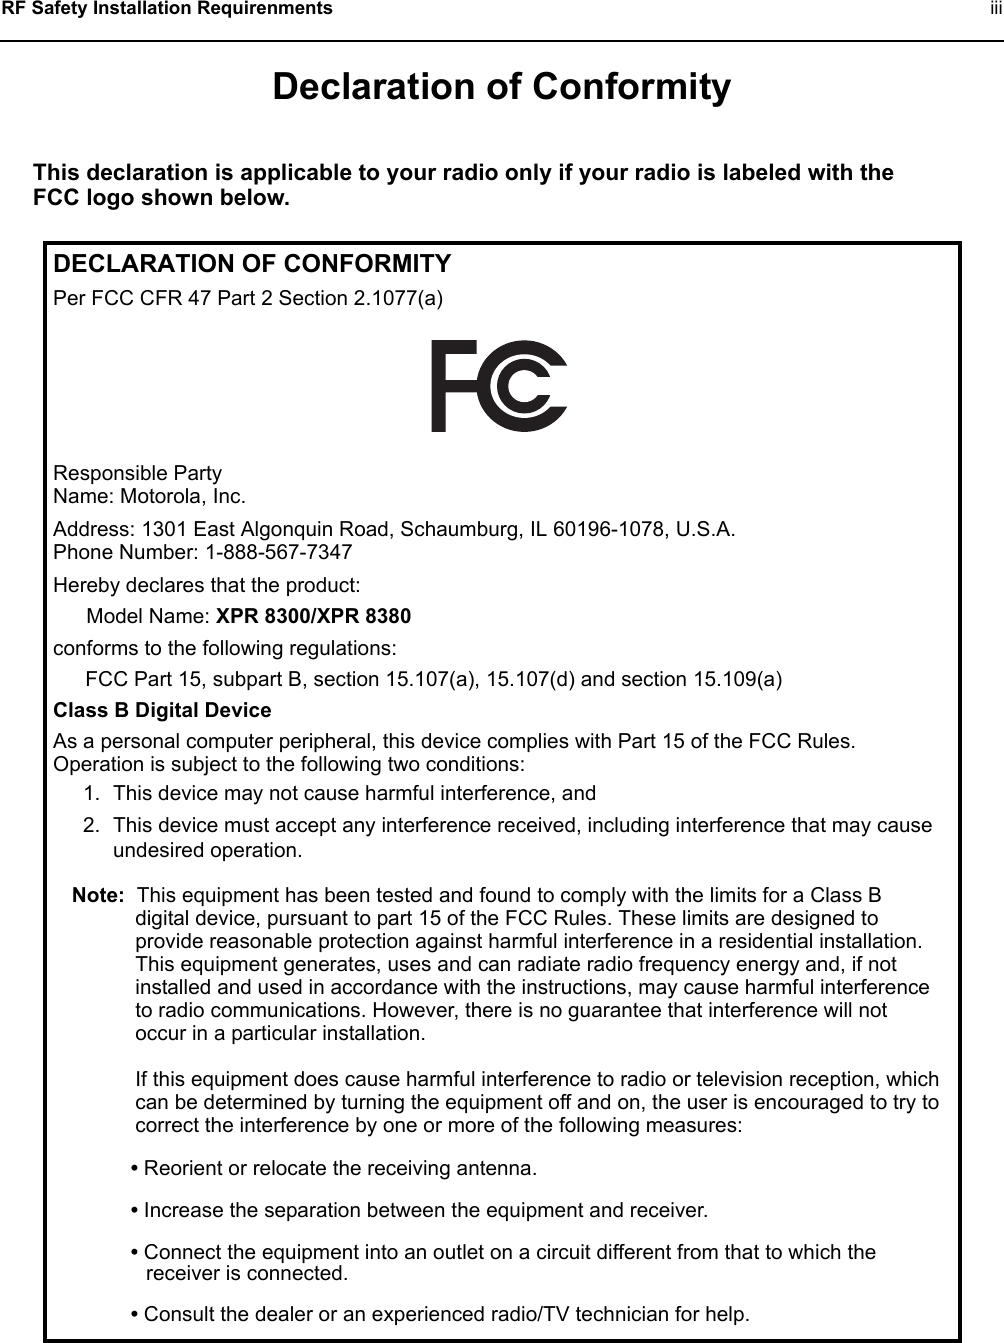  RF Safety Installation Requirenments   iiiDeclaration of ConformityThis declaration is applicable to your radio only if your radio is labeled with the FCC logo shown below.DECLARATION OF CONFORMITYPer FCC CFR 47 Part 2 Section 2.1077(a)Responsible Party Name: Motorola, Inc.Address: 1301 East Algonquin Road, Schaumburg, IL 60196-1078, U.S.A.Phone Number: 1-888-567-7347Hereby declares that the product:Model Name: XPR 8300/XPR 8380conforms to the following regulations:FCC Part 15, subpart B, section 15.107(a), 15.107(d) and section 15.109(a)Class B Digital DeviceAs a personal computer peripheral, this device complies with Part 15 of the FCC Rules. Operation is subject to the following two conditions:1. This device may not cause harmful interference, and 2. This device must accept any interference received, including interference that may cause undesired operation.Note: This equipment has been tested and found to comply with the limits for a Class B digital device, pursuant to part 15 of the FCC Rules. These limits are designed to provide reasonable protection against harmful interference in a residential installation. This equipment generates, uses and can radiate radio frequency energy and, if not installed and used in accordance with the instructions, may cause harmful interference to radio communications. However, there is no guarantee that interference will not occur in a particular installation. If this equipment does cause harmful interference to radio or television reception, which can be determined by turning the equipment off and on, the user is encouraged to try to correct the interference by one or more of the following measures:• Reorient or relocate the receiving antenna.• Increase the separation between the equipment and receiver.• Connect the equipment into an outlet on a circuit different from that to which the receiver is connected. • Consult the dealer or an experienced radio/TV technician for help.